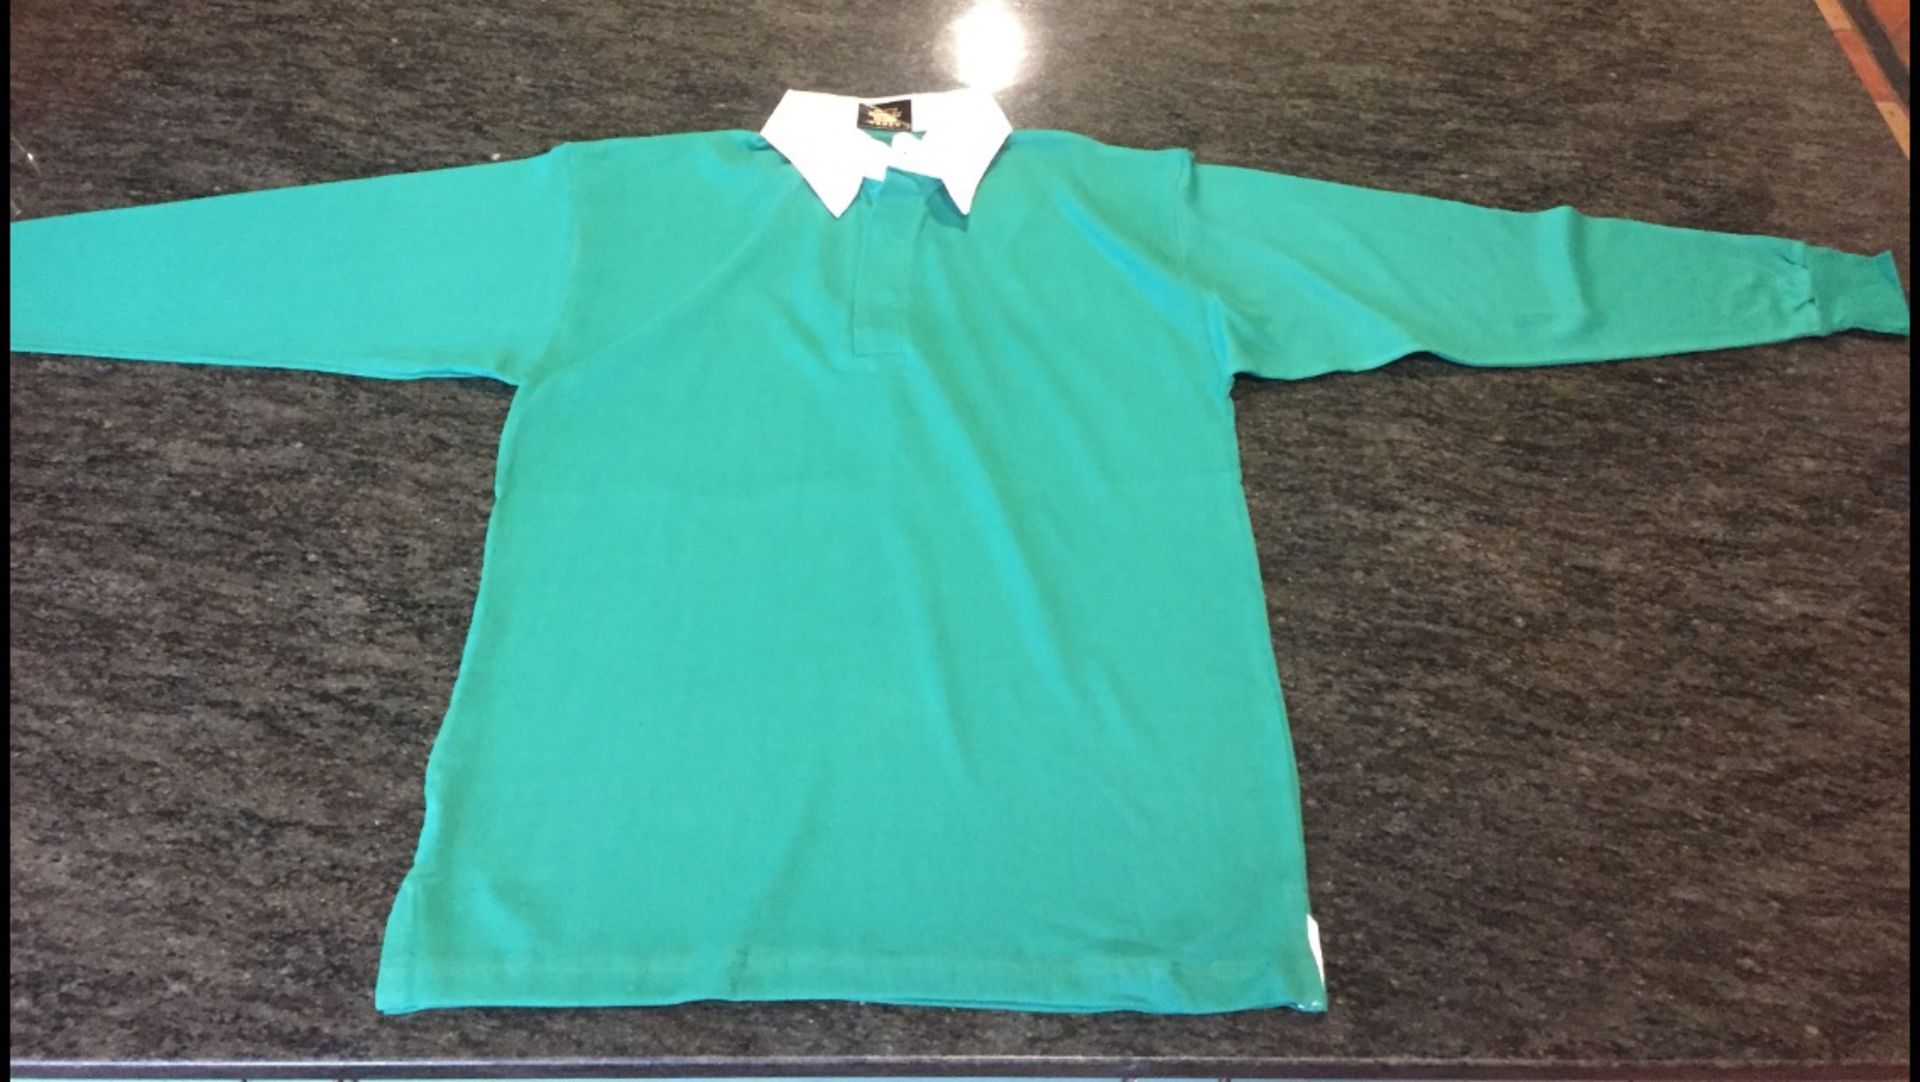 BRAND NEW! Job Lot of HIGH QUALITY 35 Mens Green Guinness Rugby Shirts Large £60 RESERVE - Image 6 of 7